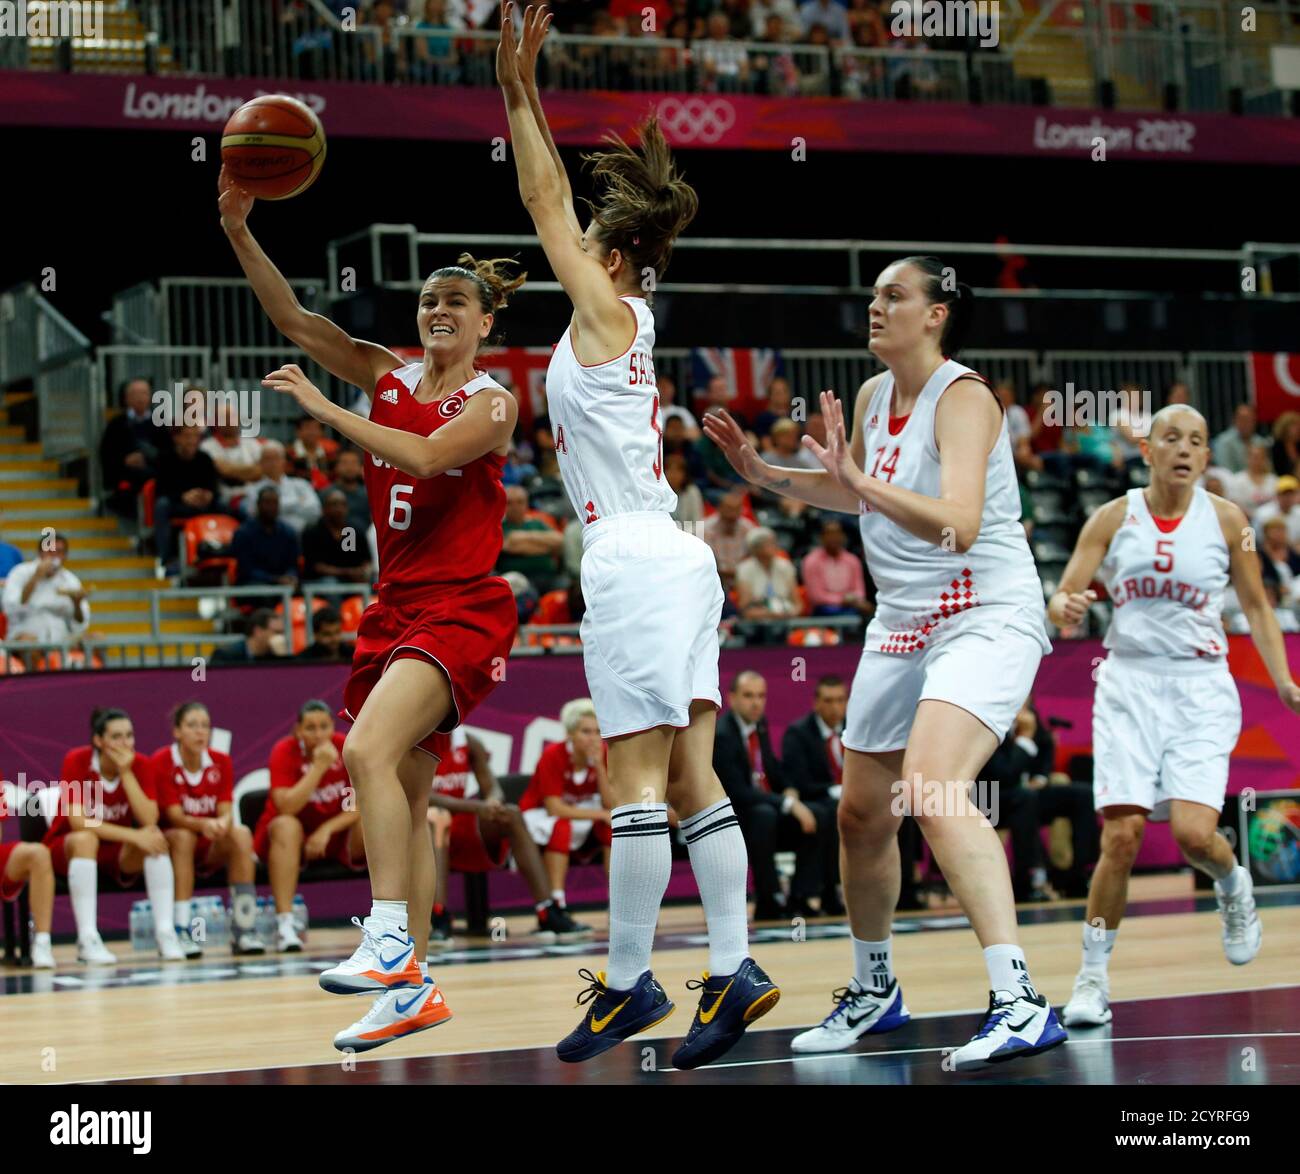 Turkey's Birsel Vardarli (L) makes a pass around Croatia's Emanuela Salopek  (C) and Luca Ivankovic during their women's preliminary round Group A  basketball match at the Basketball Arena during the London 2012